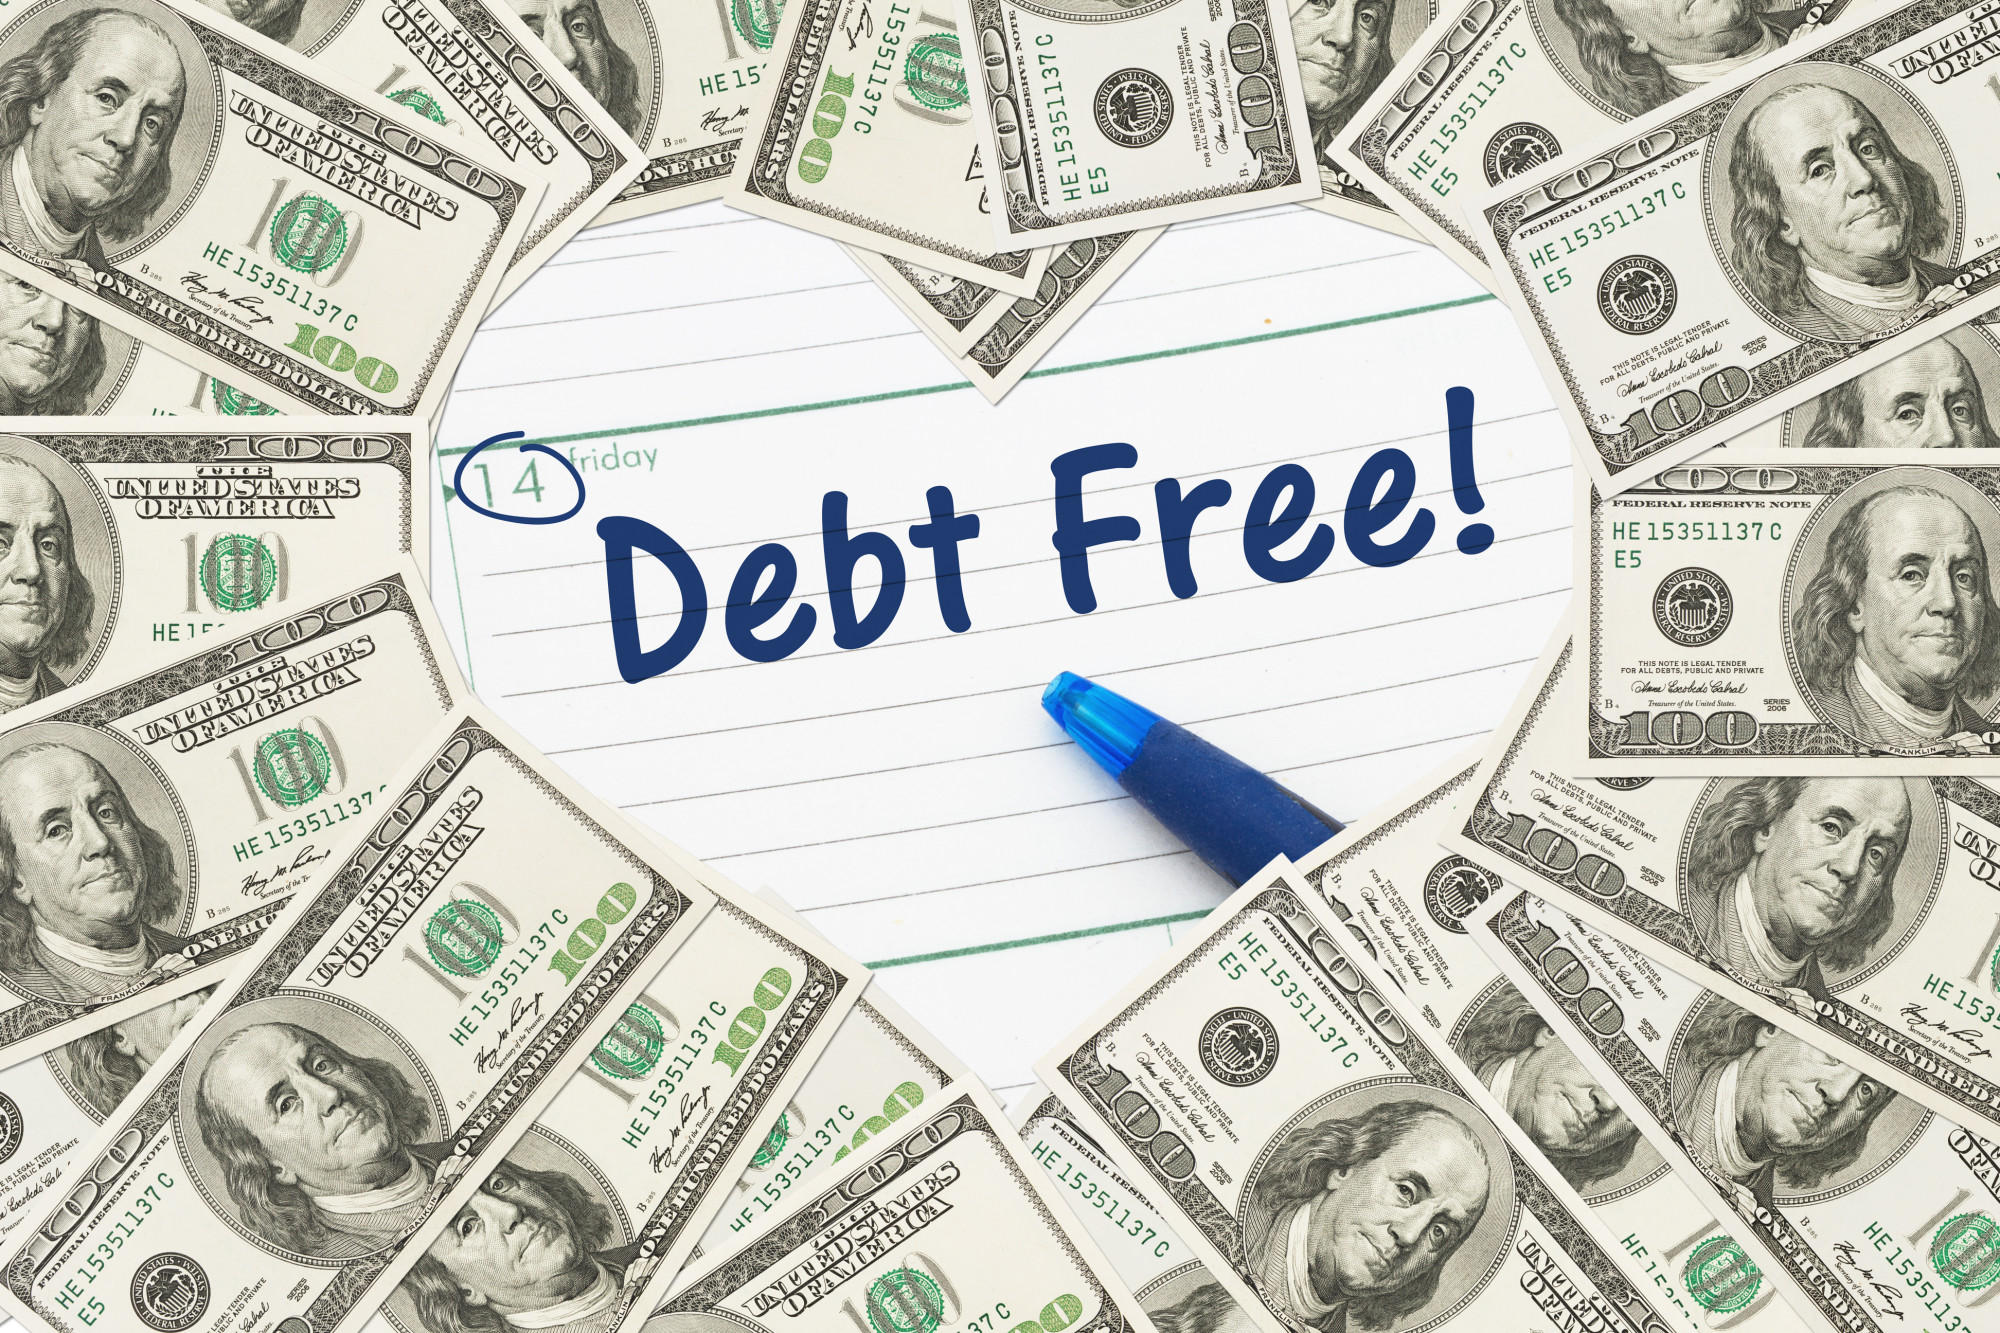 how to pay off debts